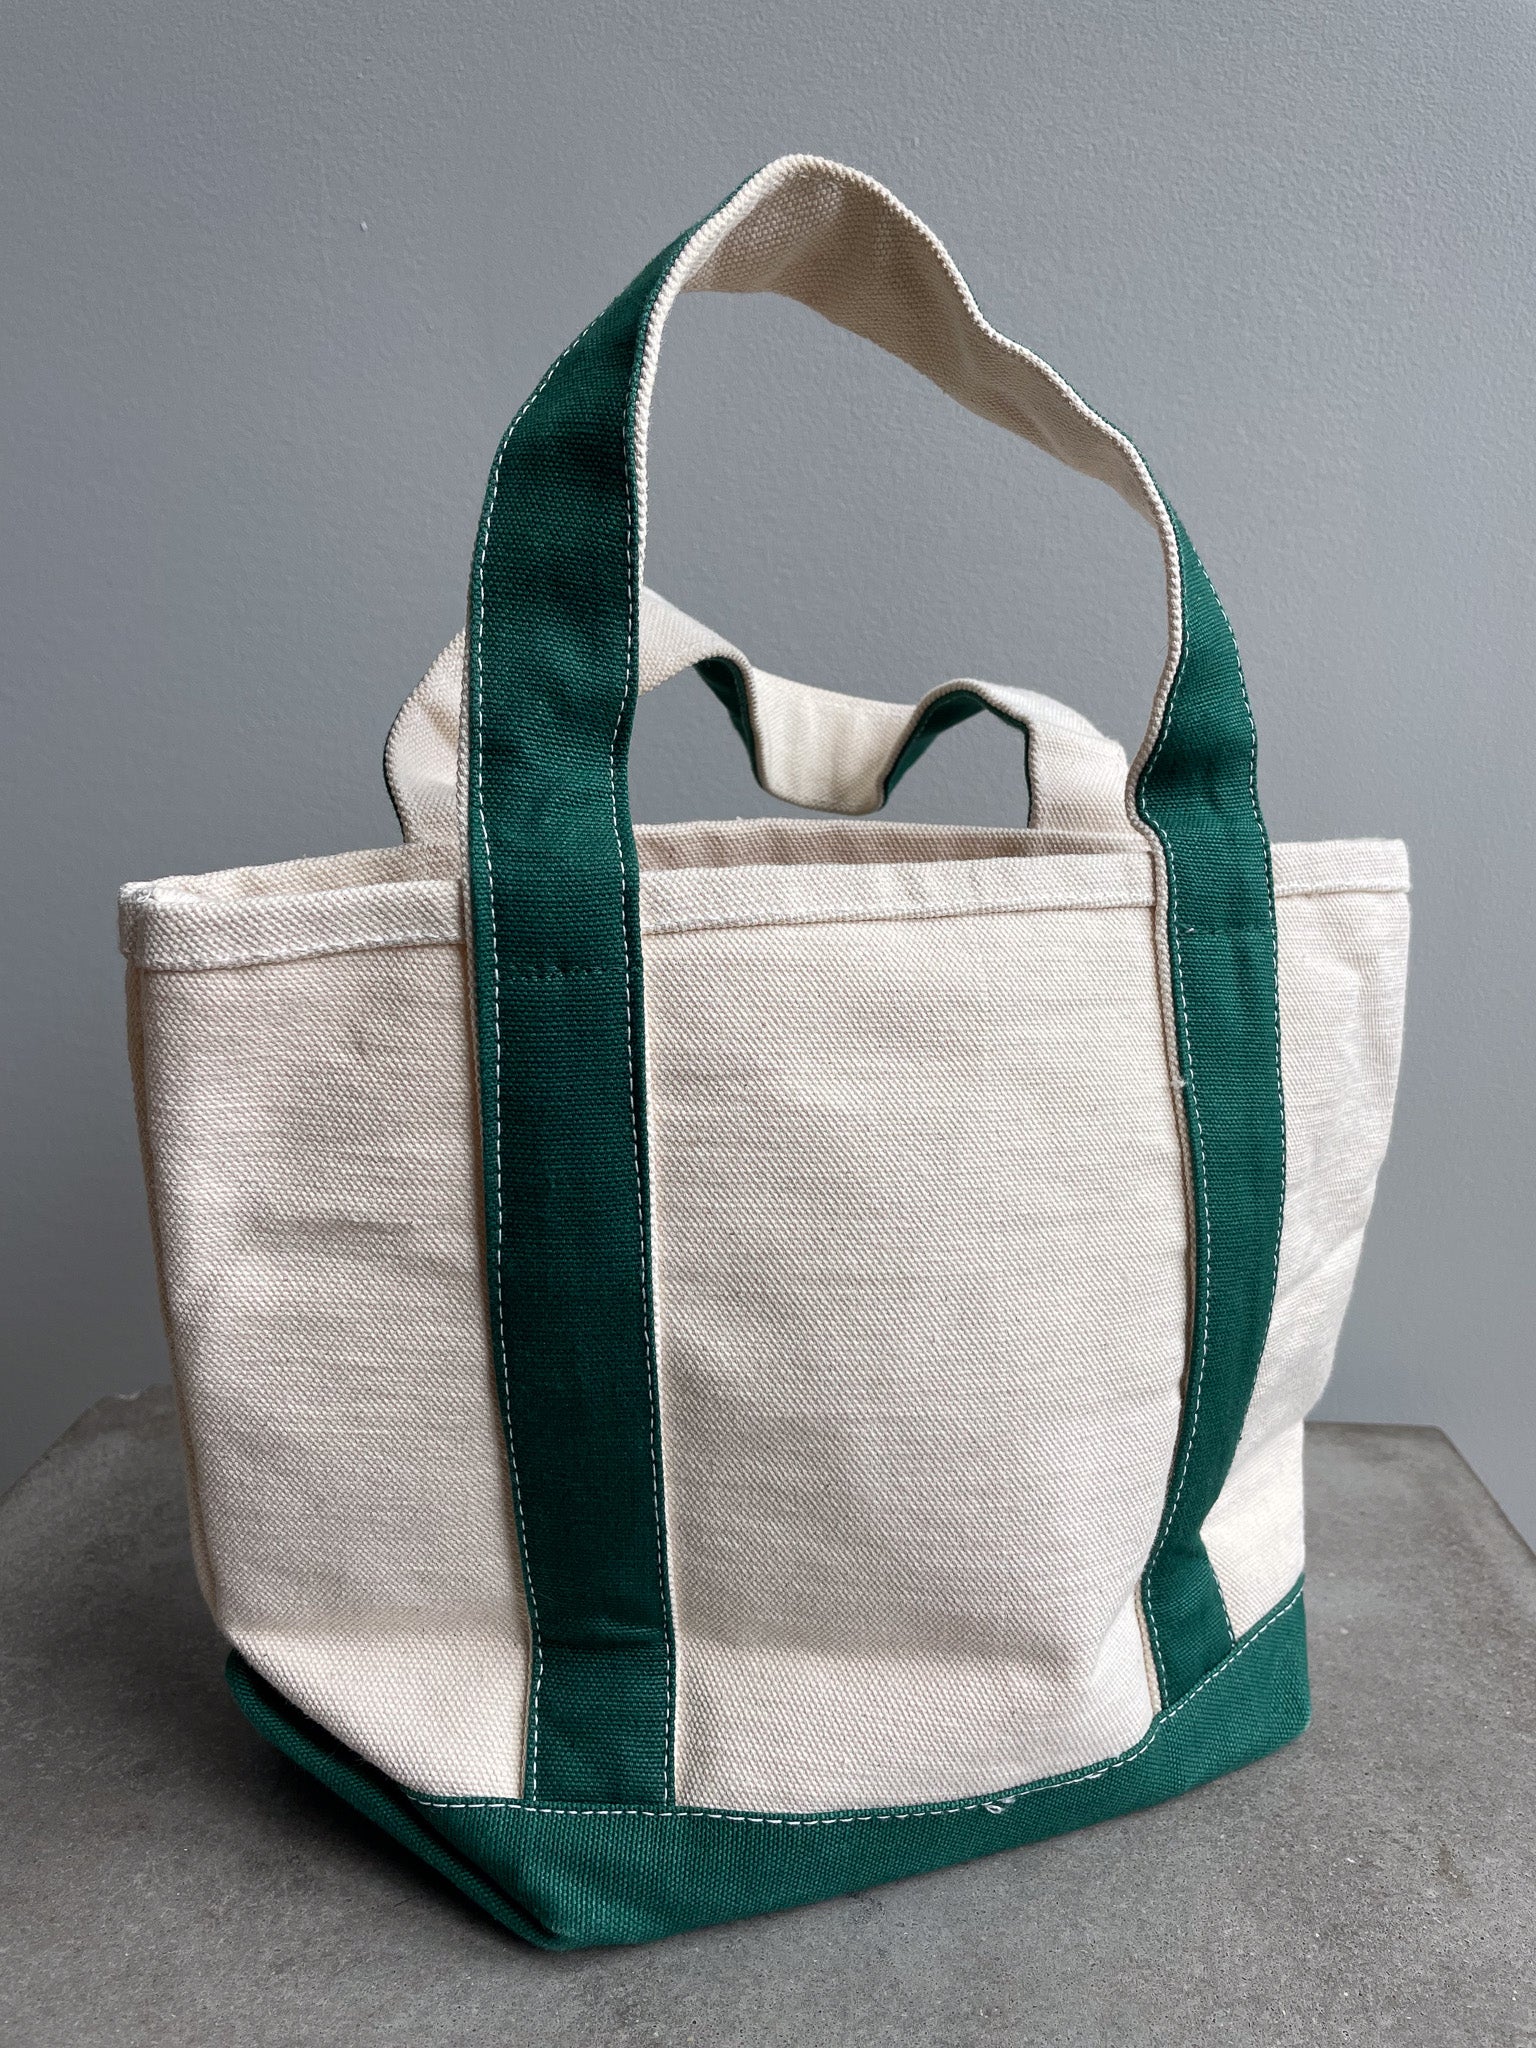 Vintage L.L. Bean Boat and Tote Canvas Tote Bag Small Blue Handles